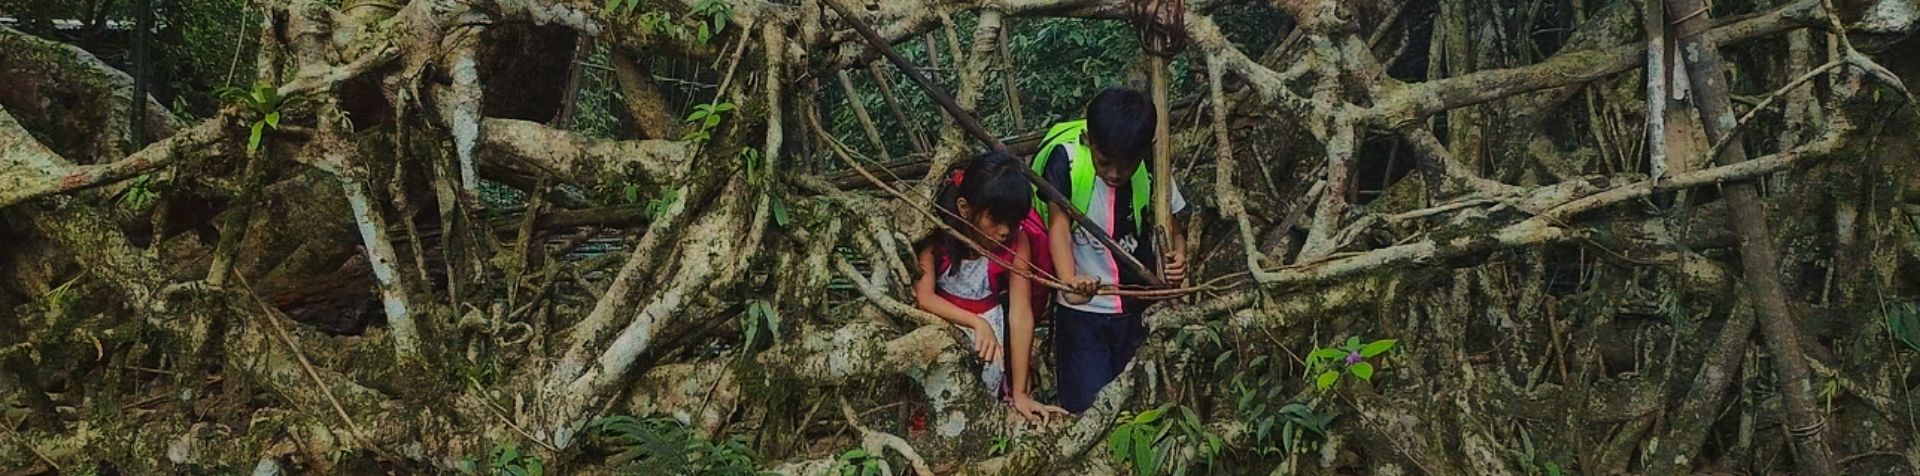 Two children are walking through the rainforest, looking at the branches.